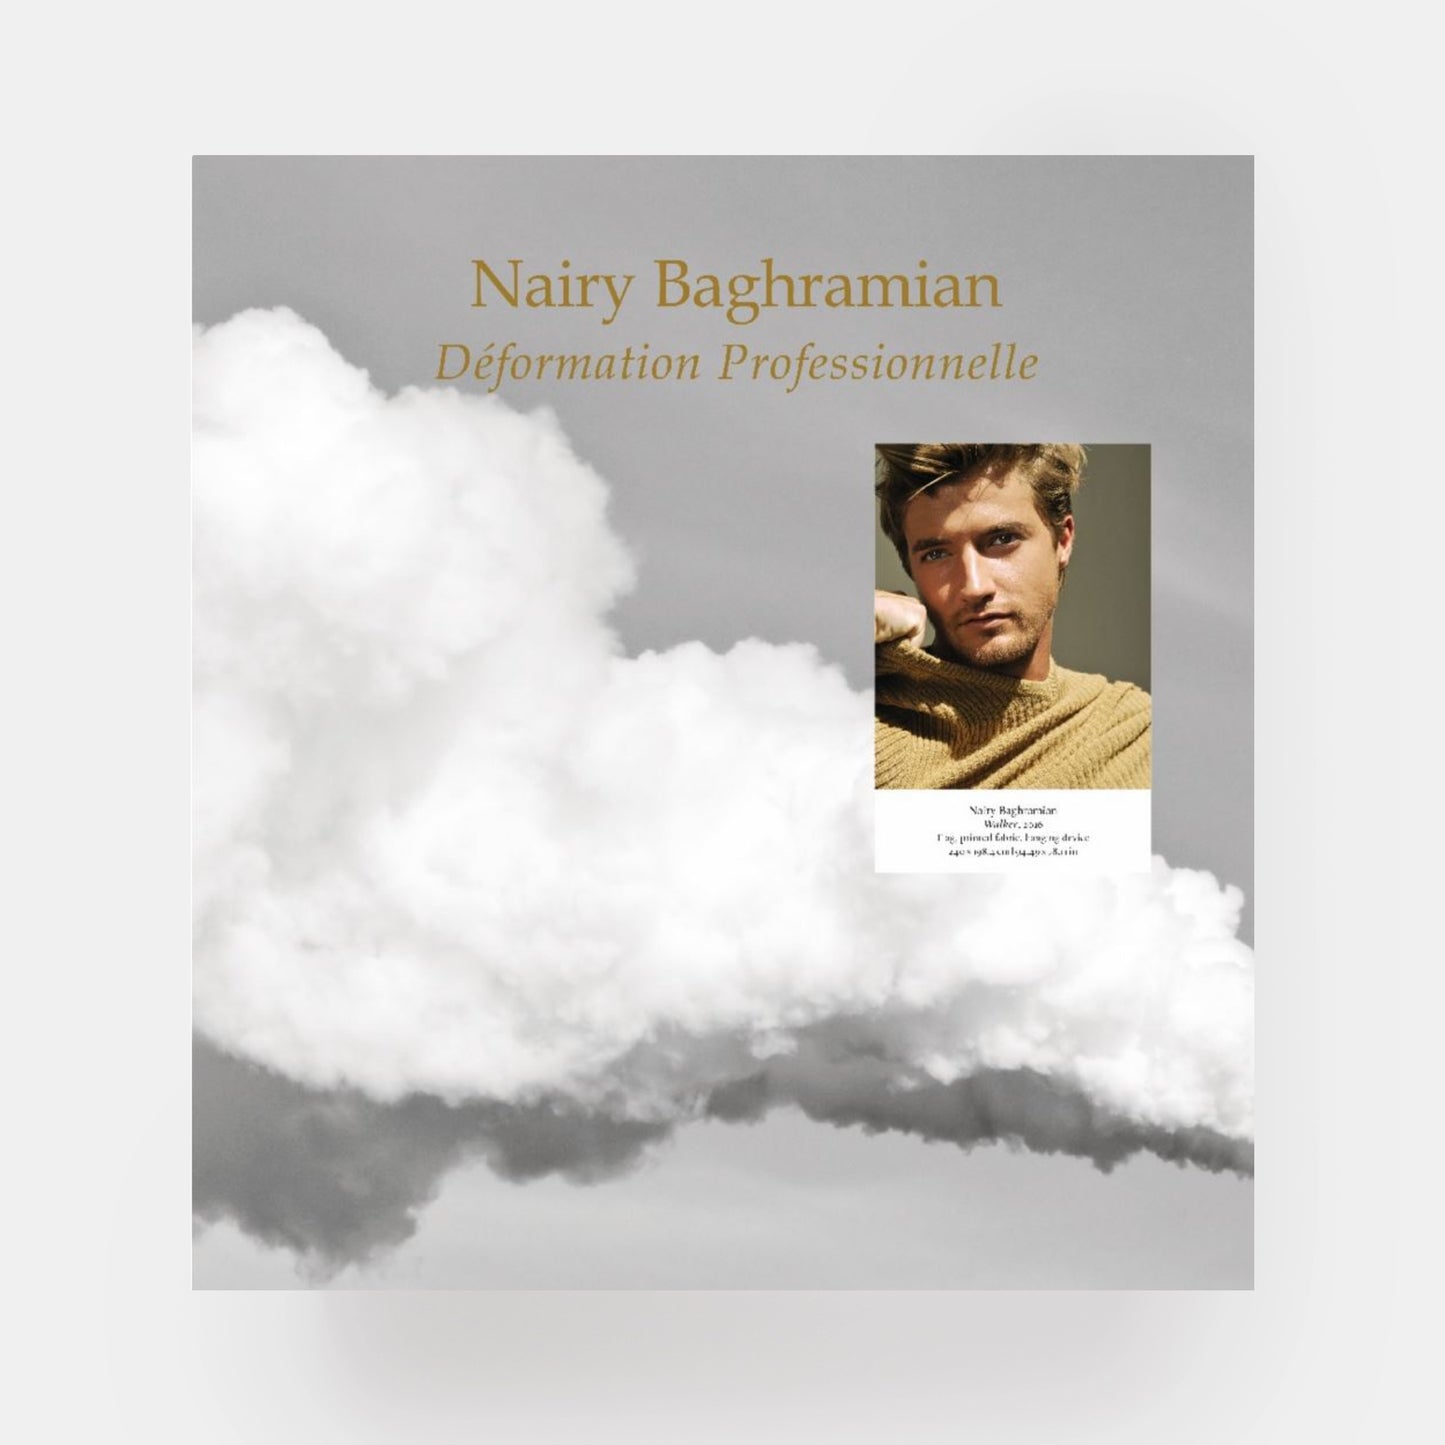 Nairy Baghramian: Deformation Professionnelle